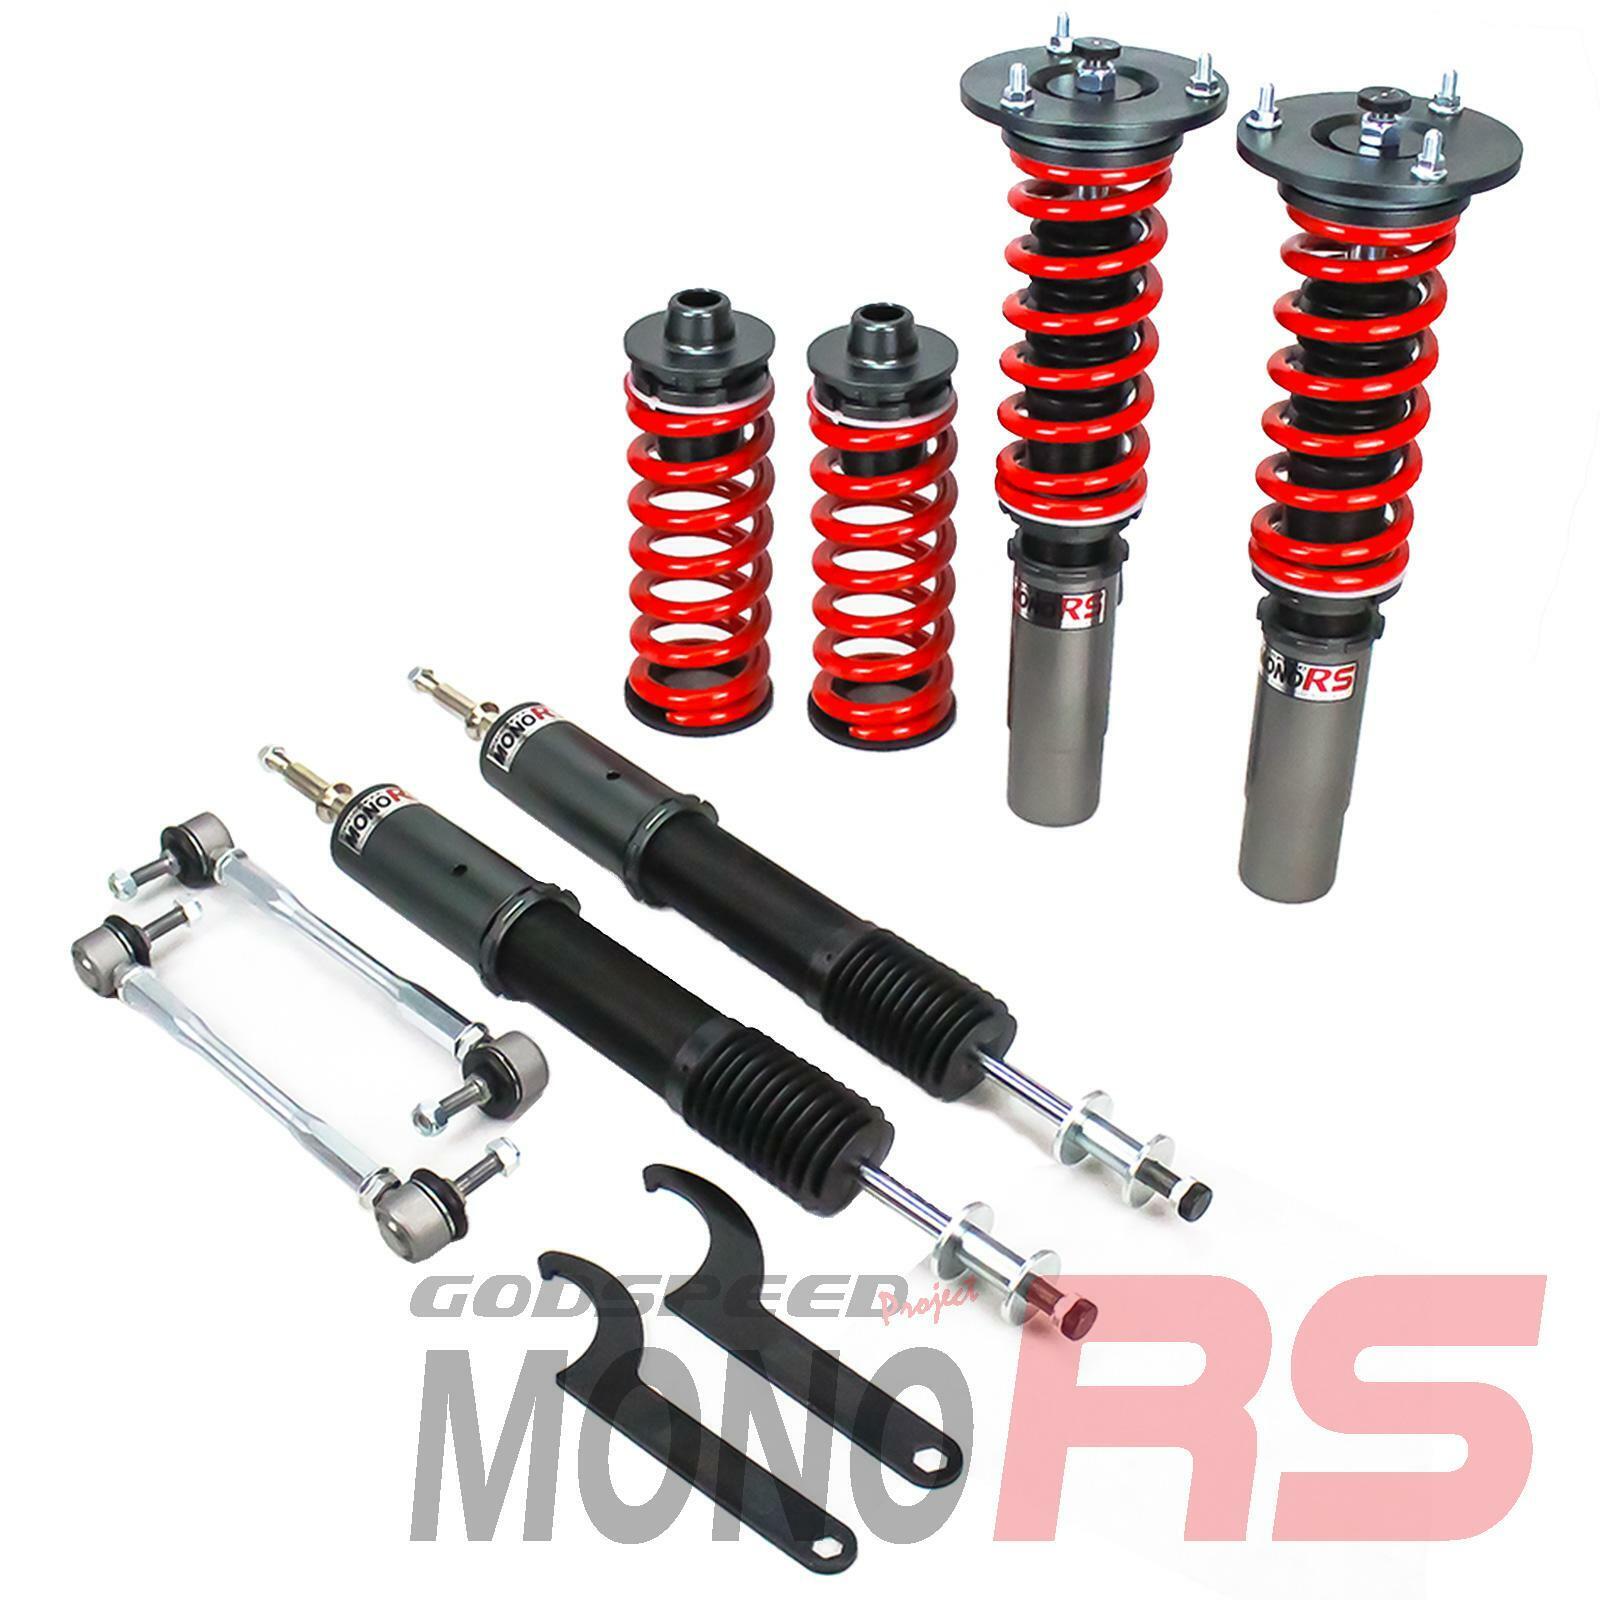 Godspeed made for BMW X1 sDrive (E84) 2013-15 MonoRS Coilovers MRS1412